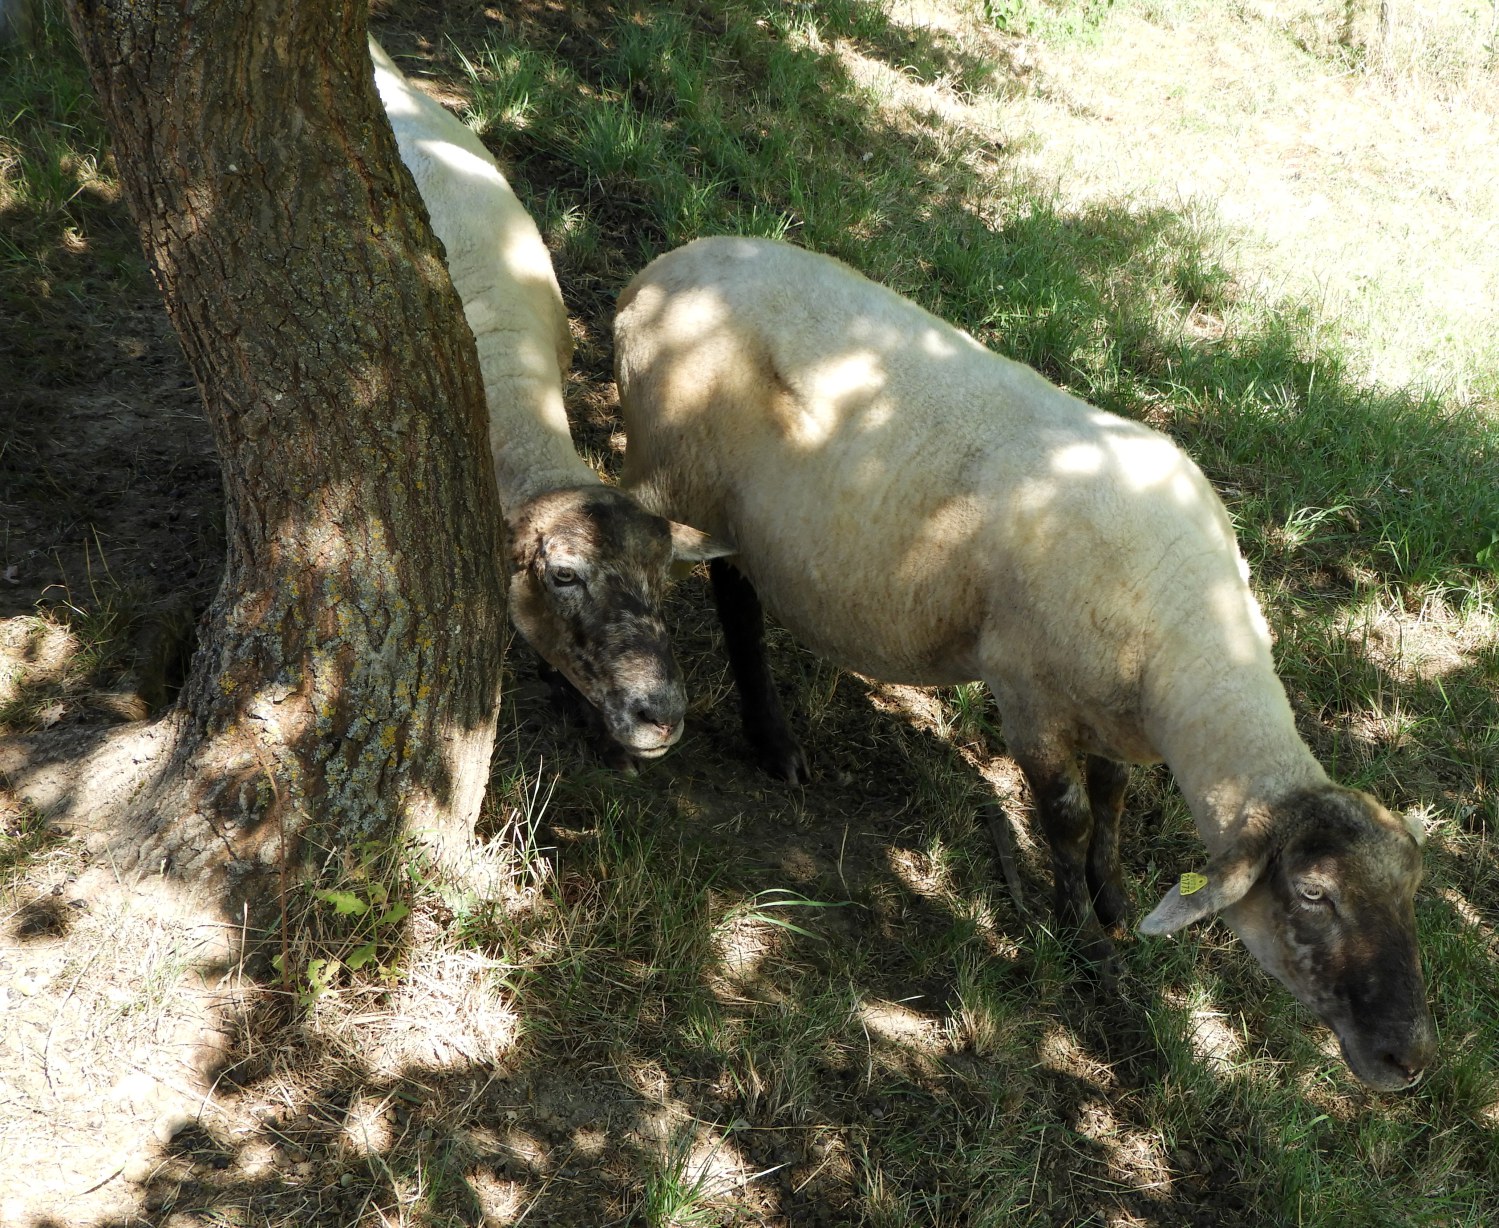 Even the sheep are in the shade